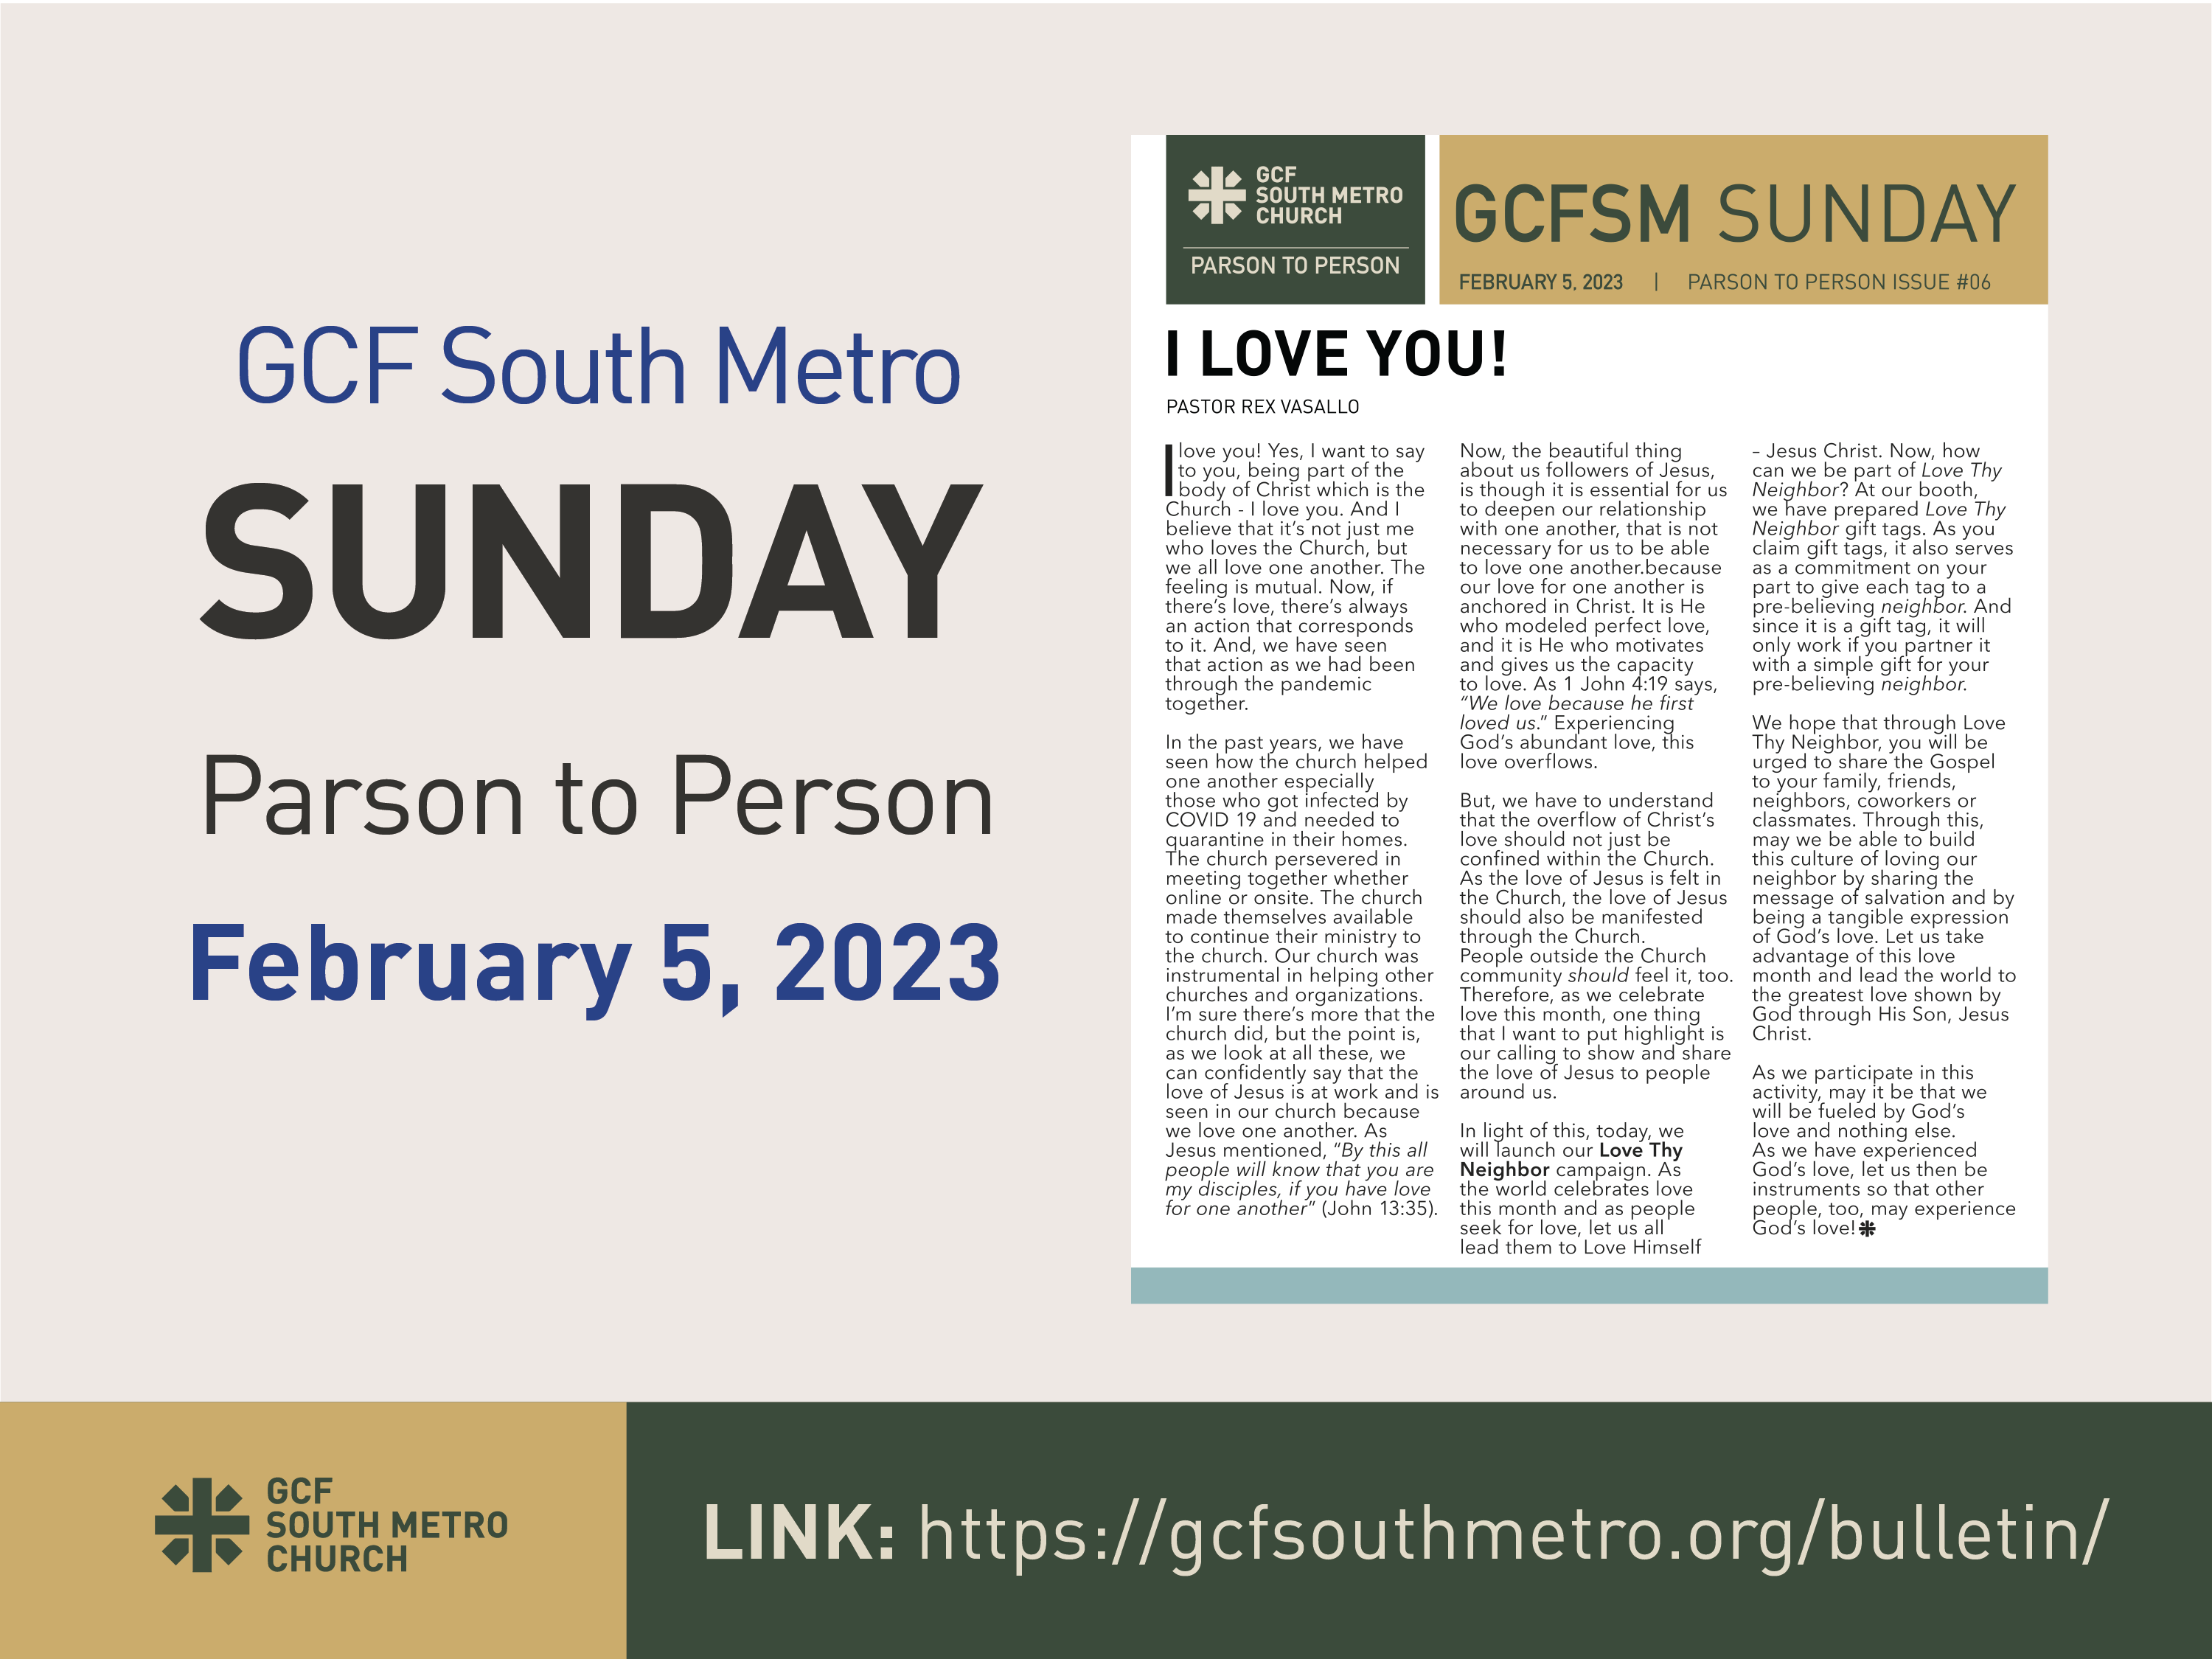 Sunday Bulletin – Parson to Person, February 5, 2023